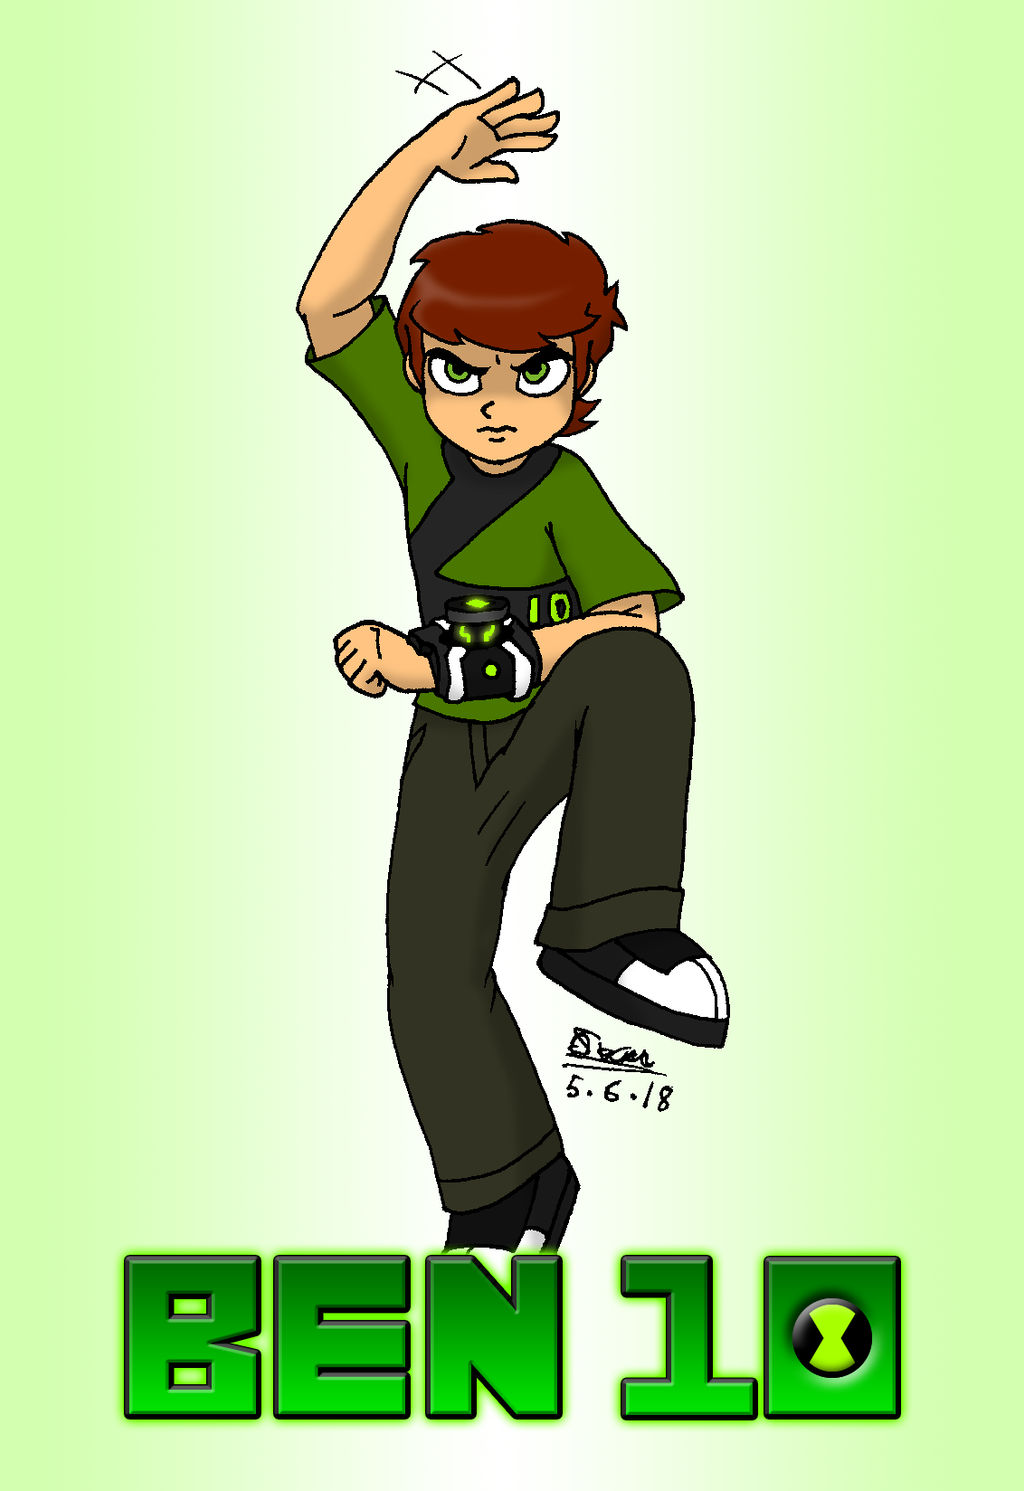 Ben 10 Alien Force its Hero Time! by seanscreations1 on DeviantArt